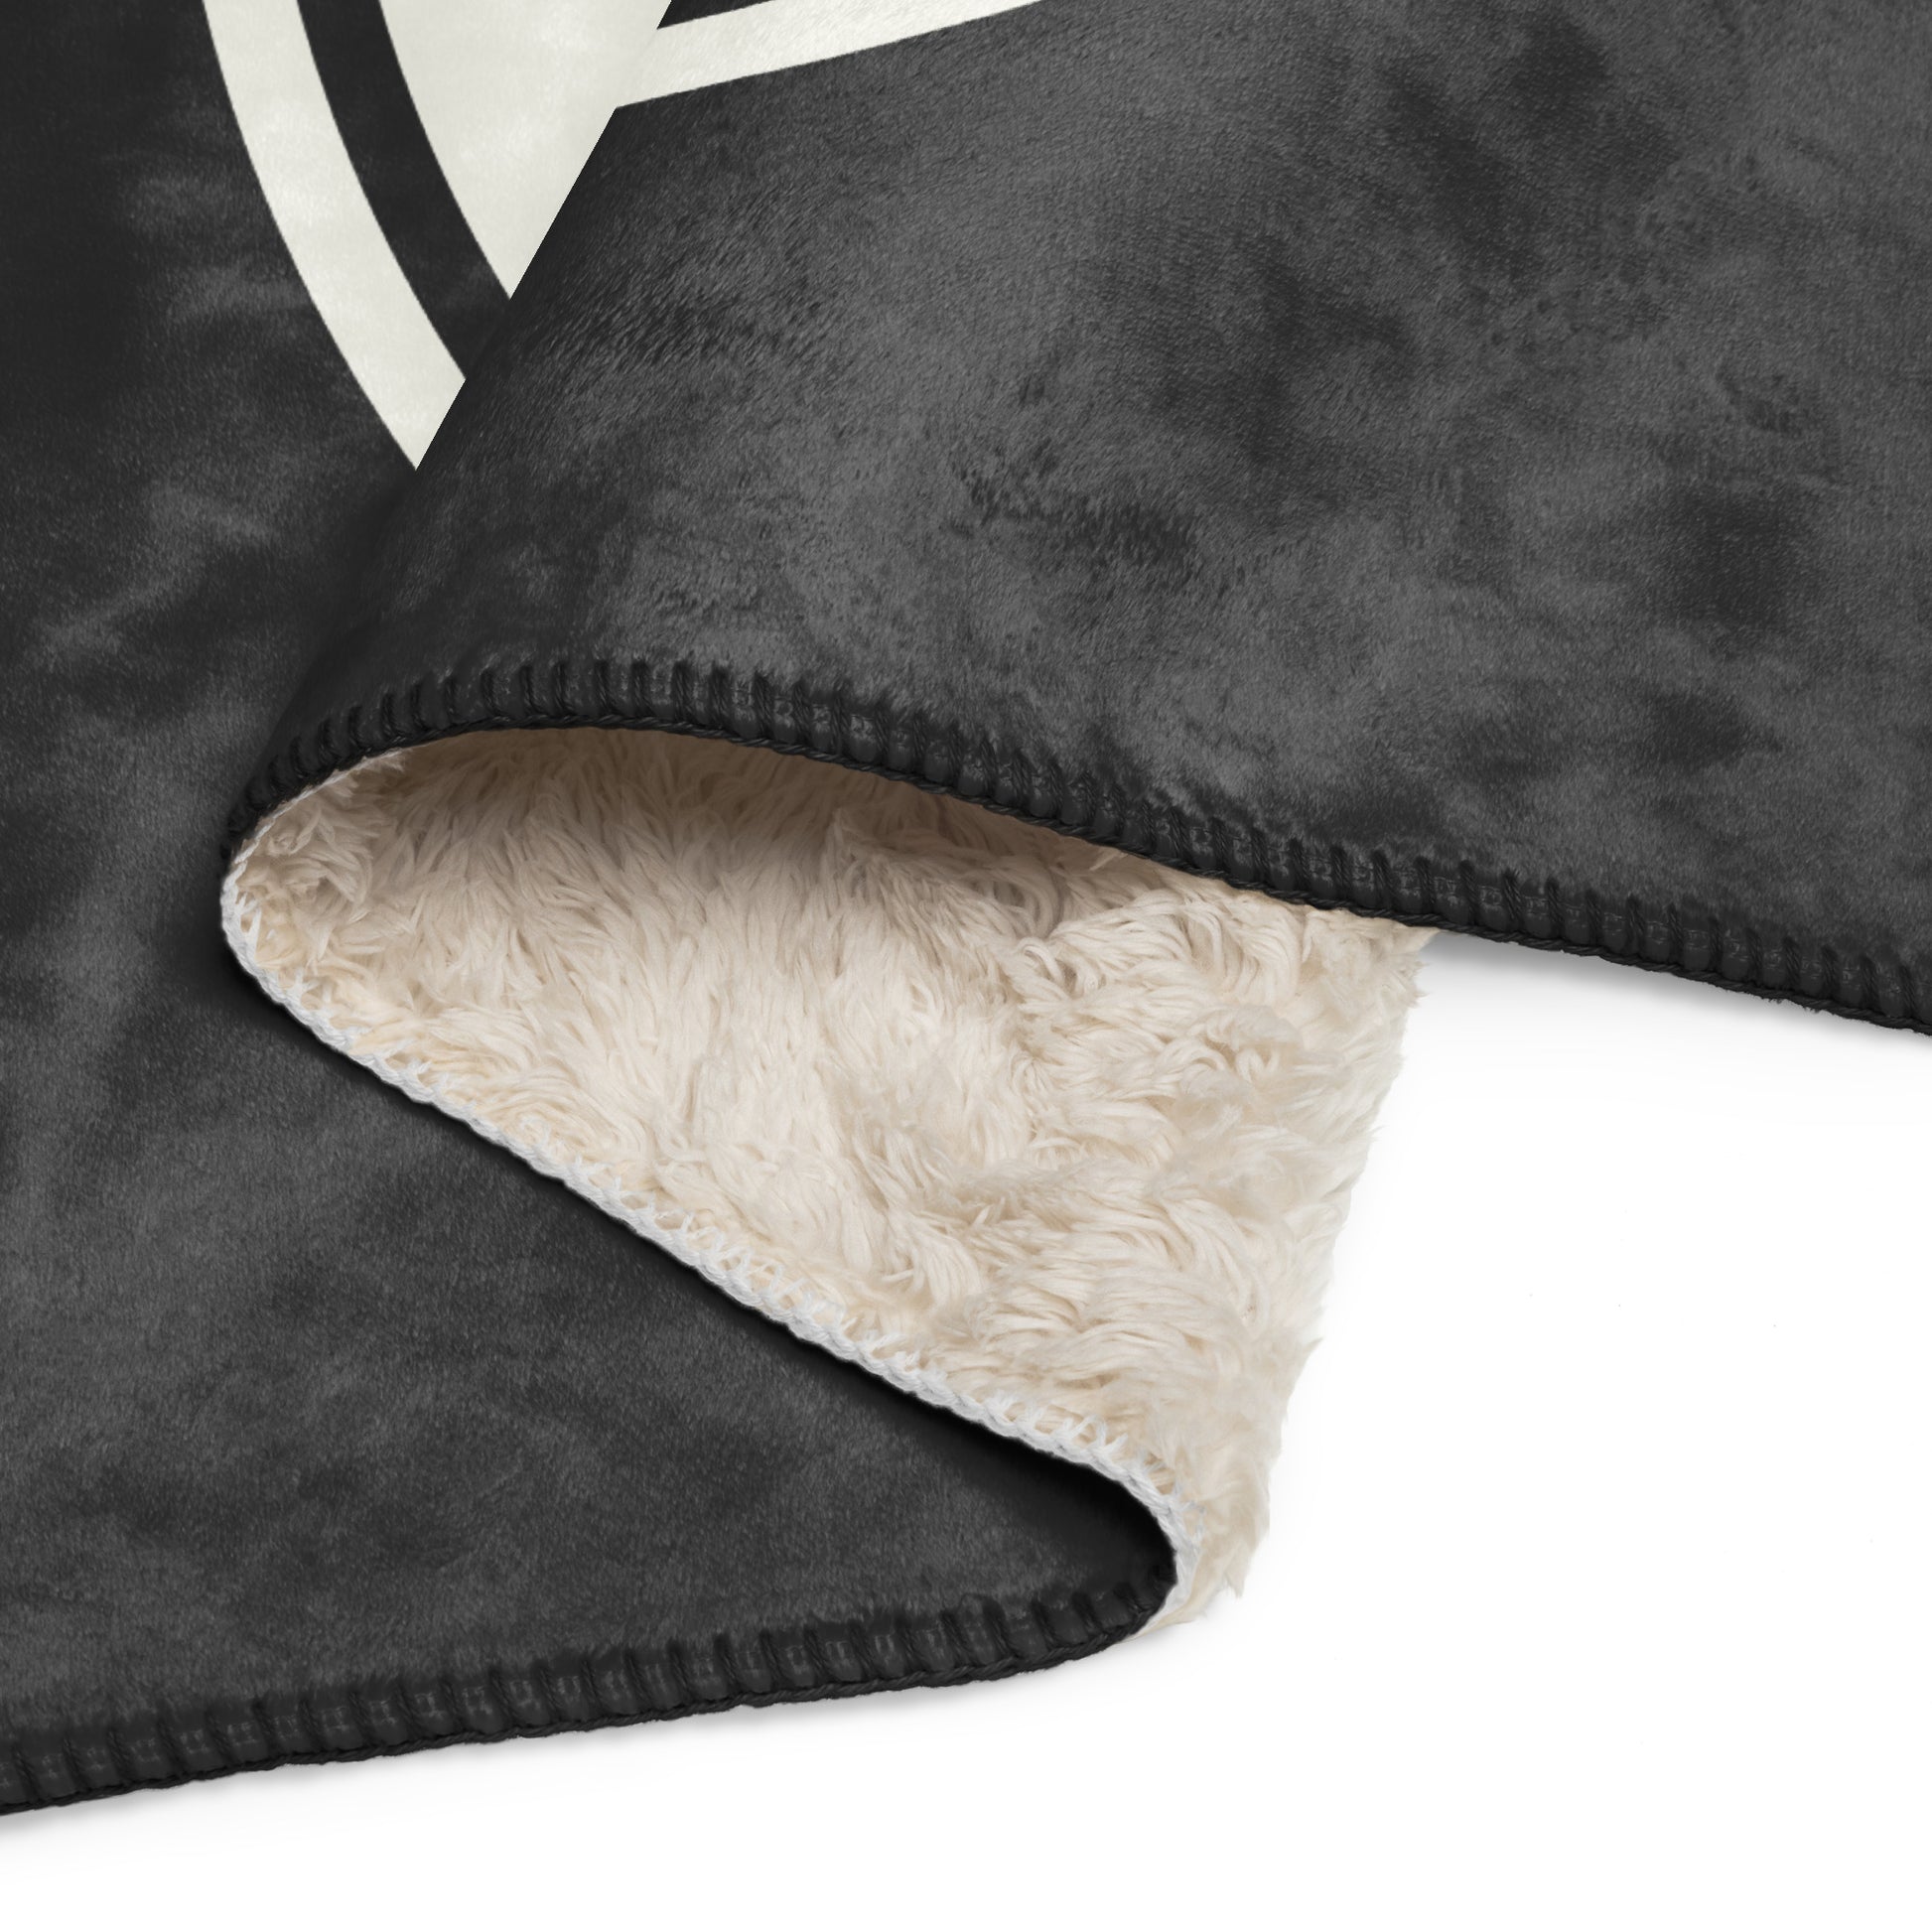 Unique Travel Gift Sherpa Blanket - White Oval • DUB Dublin • YHM Designs - Image 08